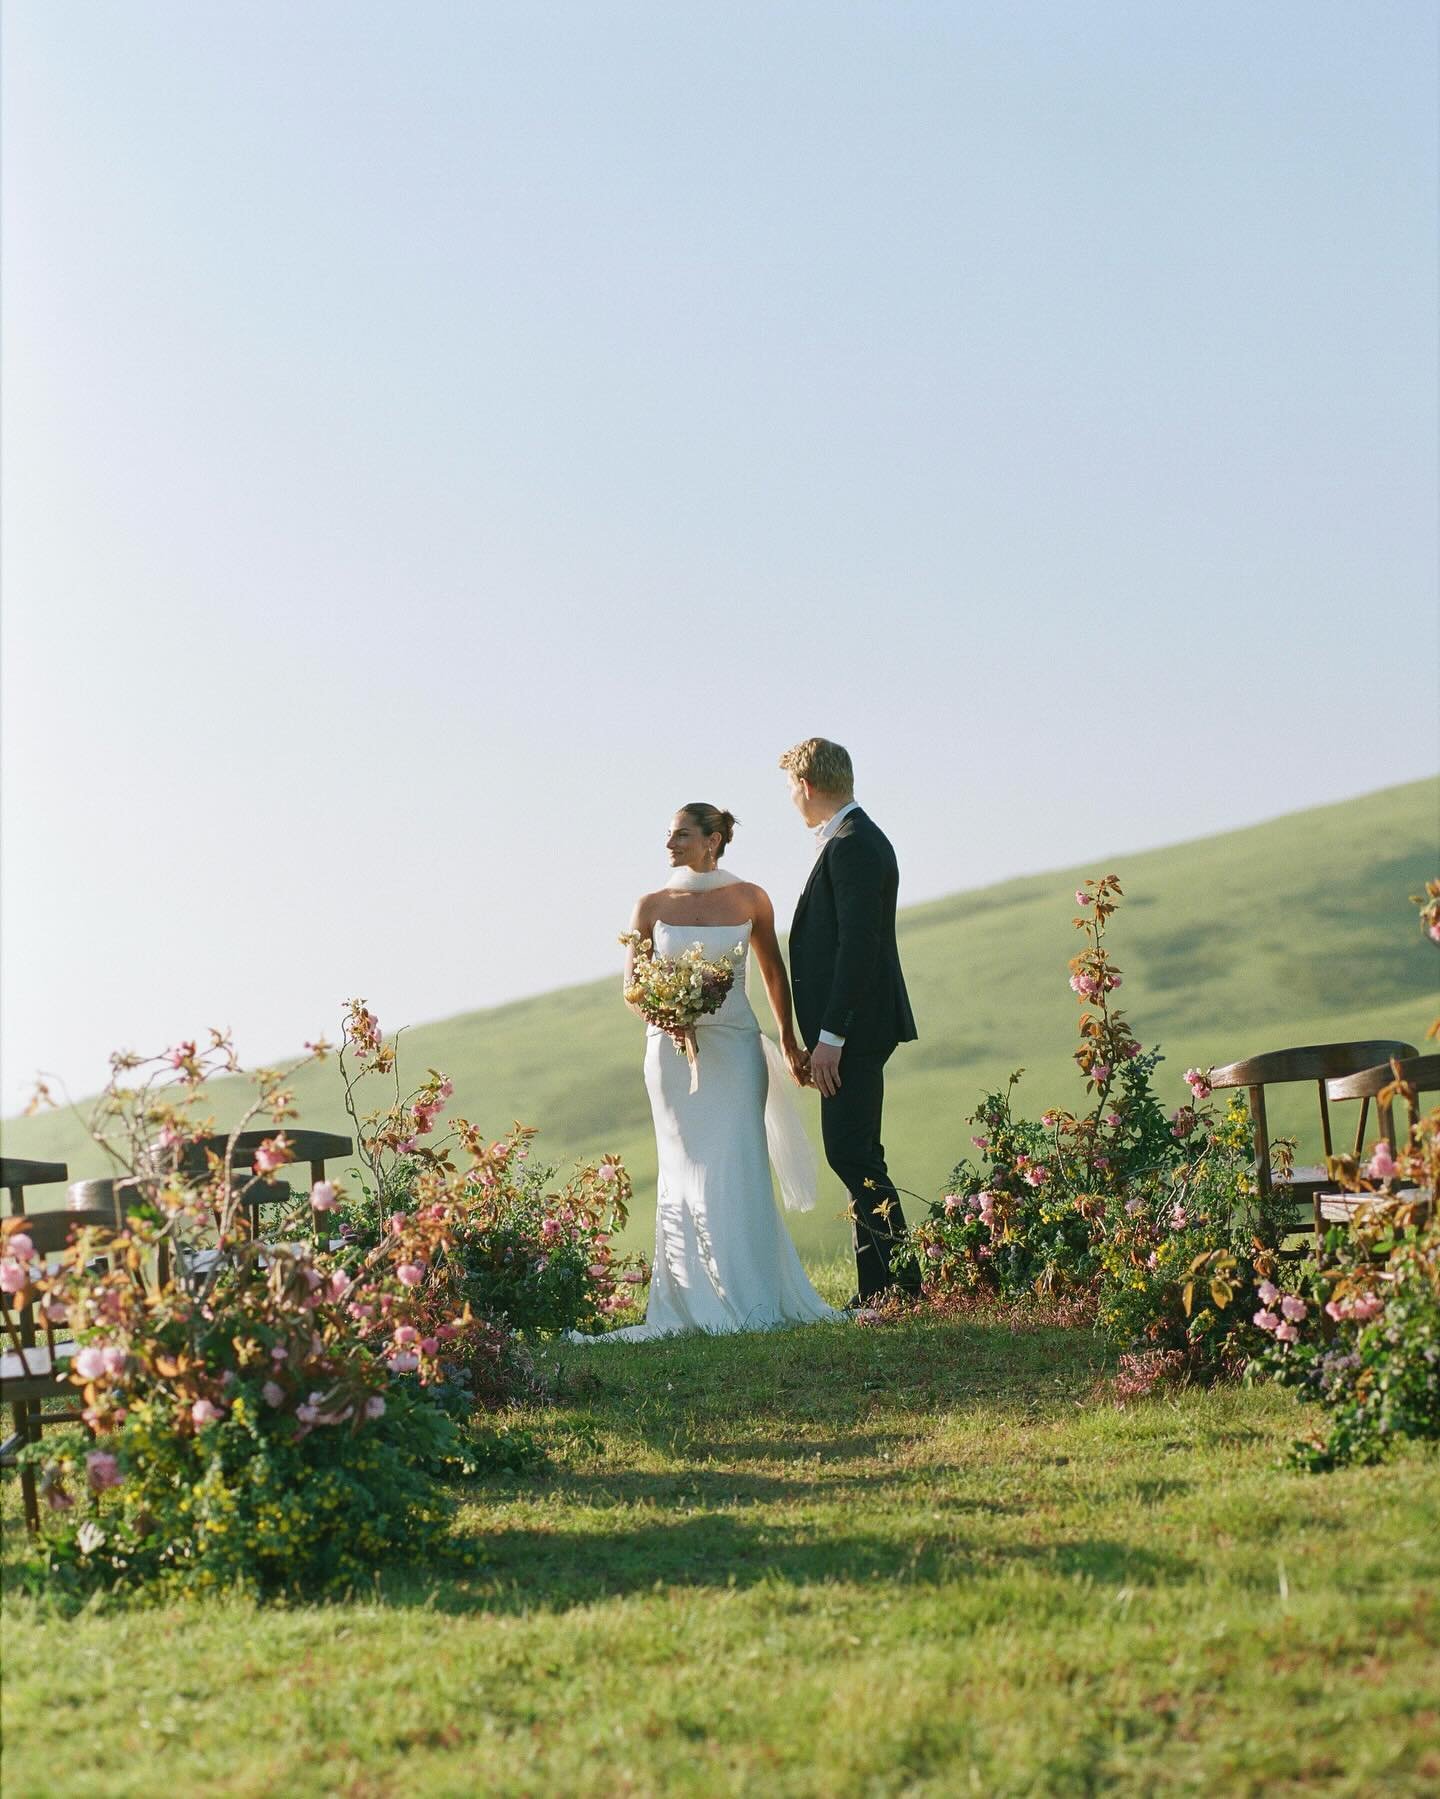 Embracing Spring in all its glory featuring blossoming branches for a serene cliffside ceremony overlooking Tomales Bay. 
.
.
.
Planning &amp; Design | @amriandco&nbsp;
Photography | @amandapoolphoto&nbsp;
Florist&nbsp;| @ashandoakfloral&nbsp;
Beauty